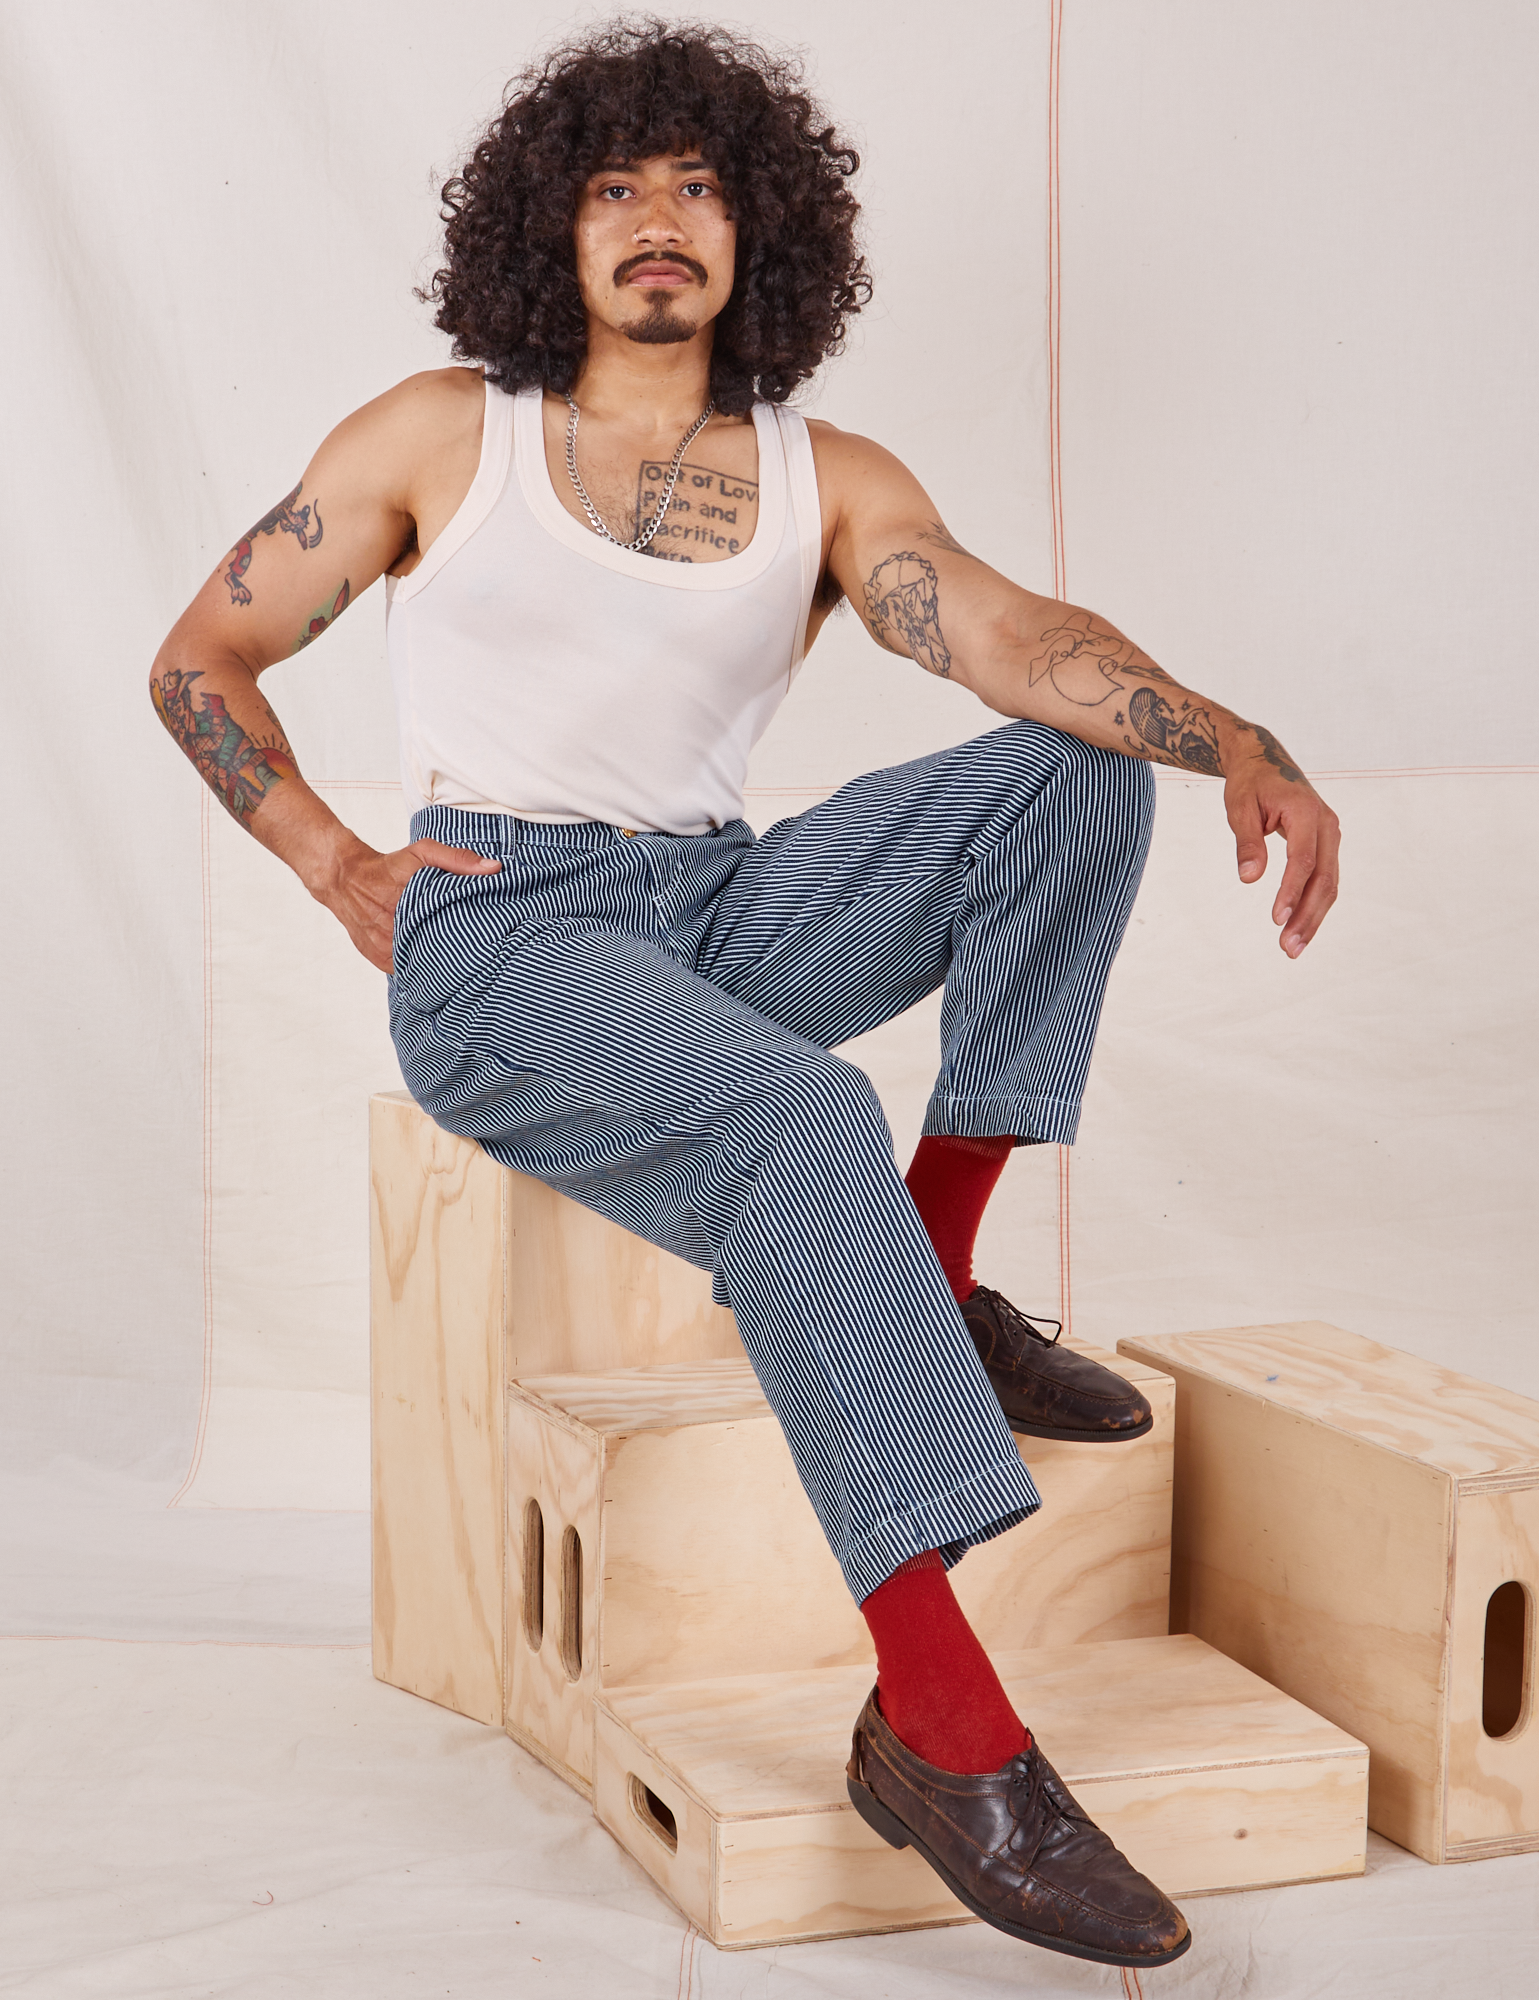 Jesse is sitting on a wooden crate wearing Denim Trouser Jeans in Railroad Stripe and Tank Top in vintage tee off-white